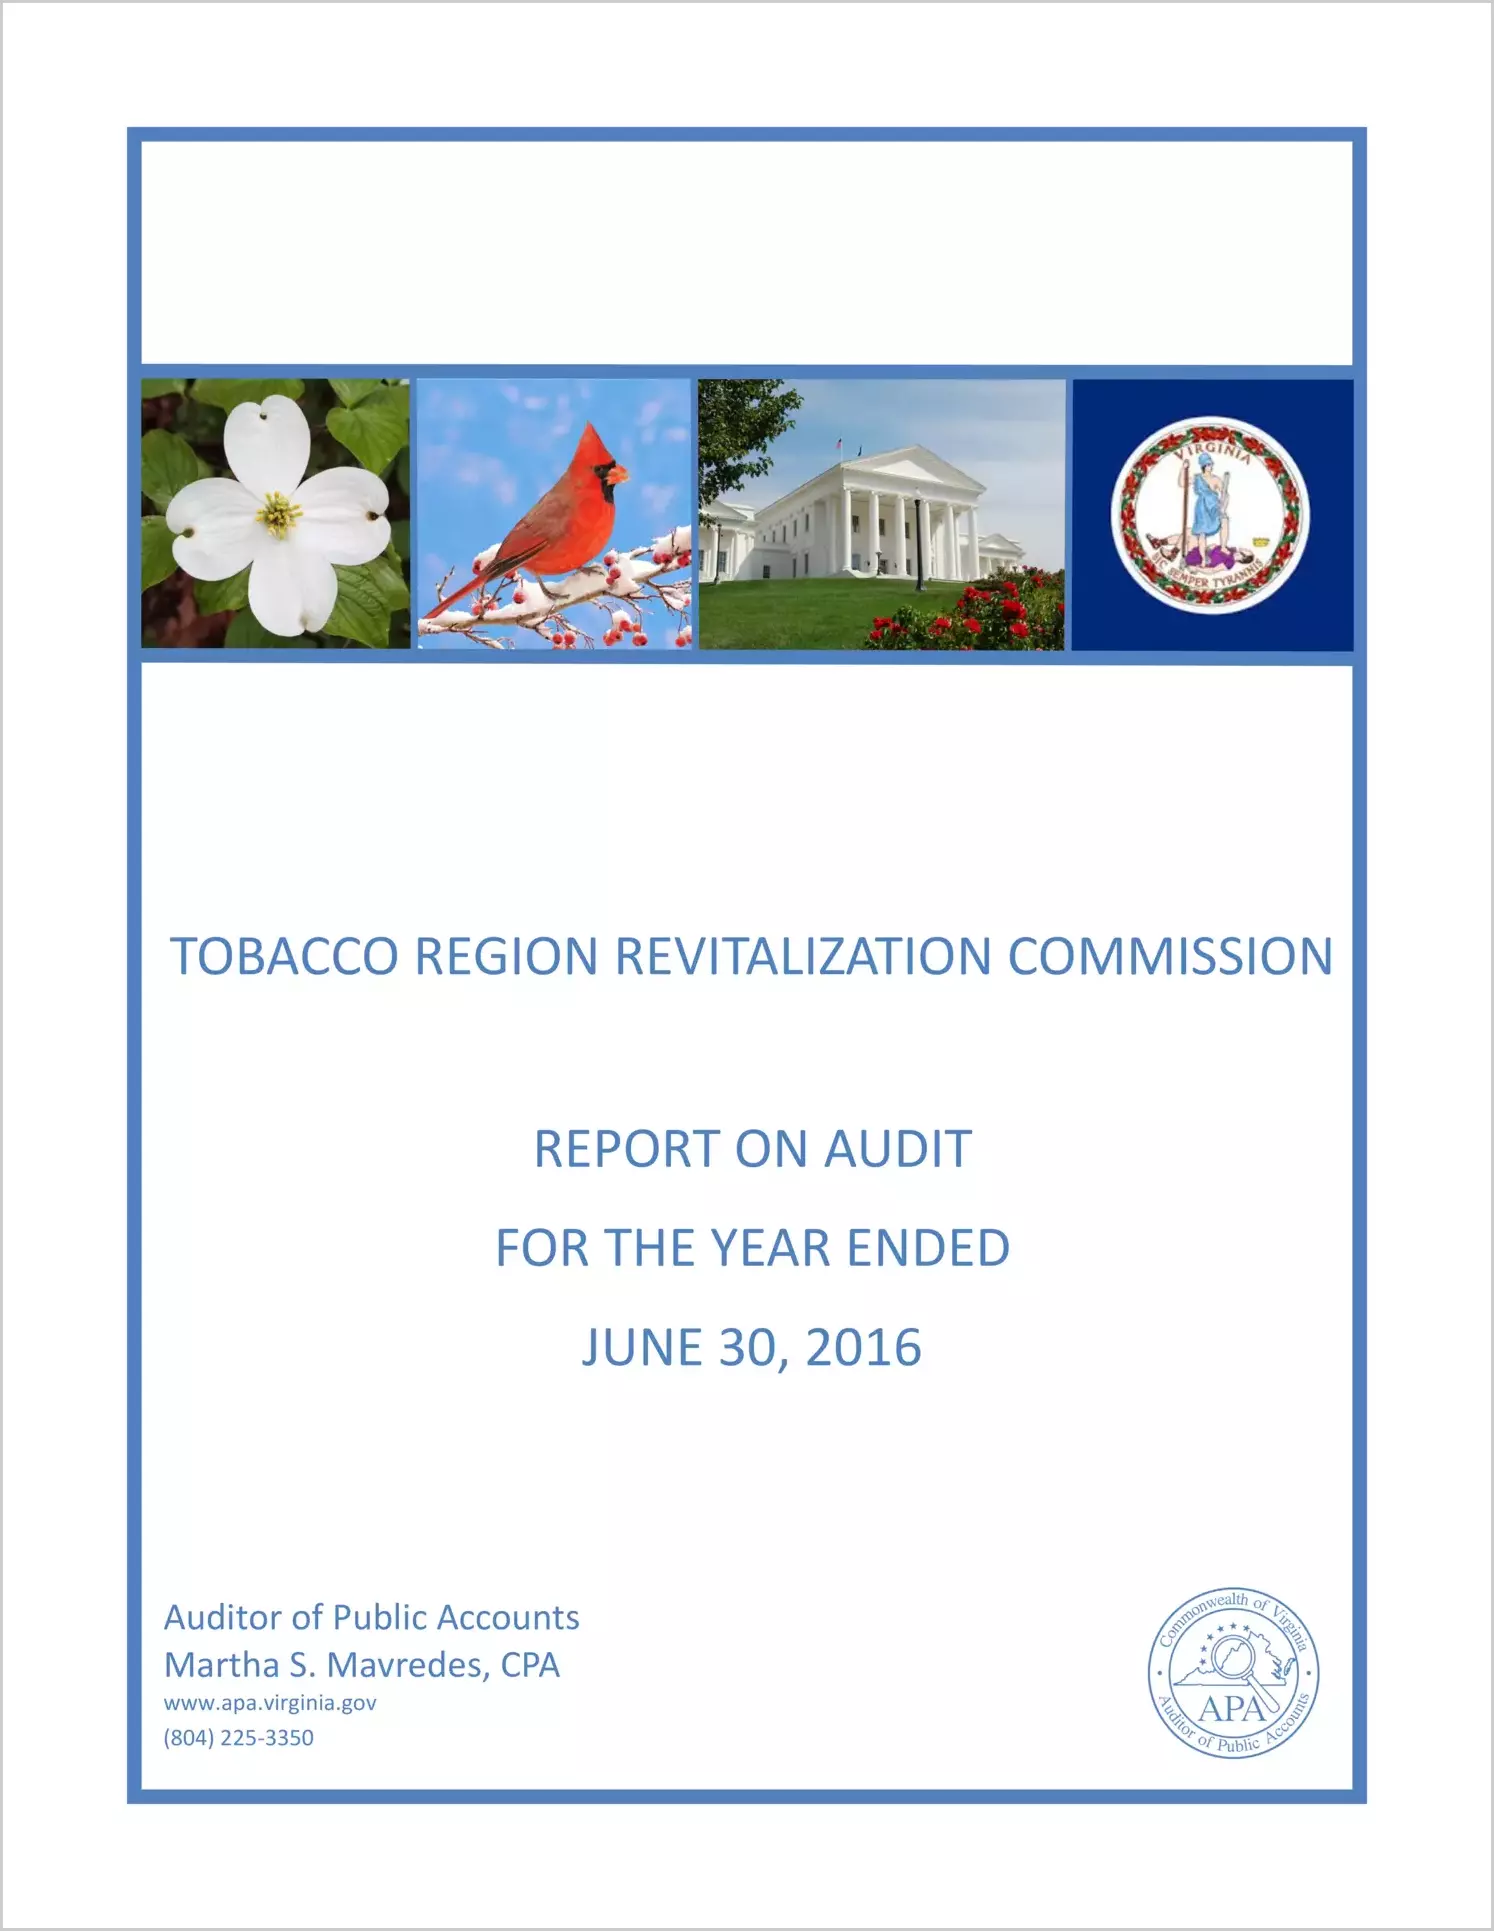 Tobacco Region Revitalization Commission for the fiscal year ended June 30, 2016